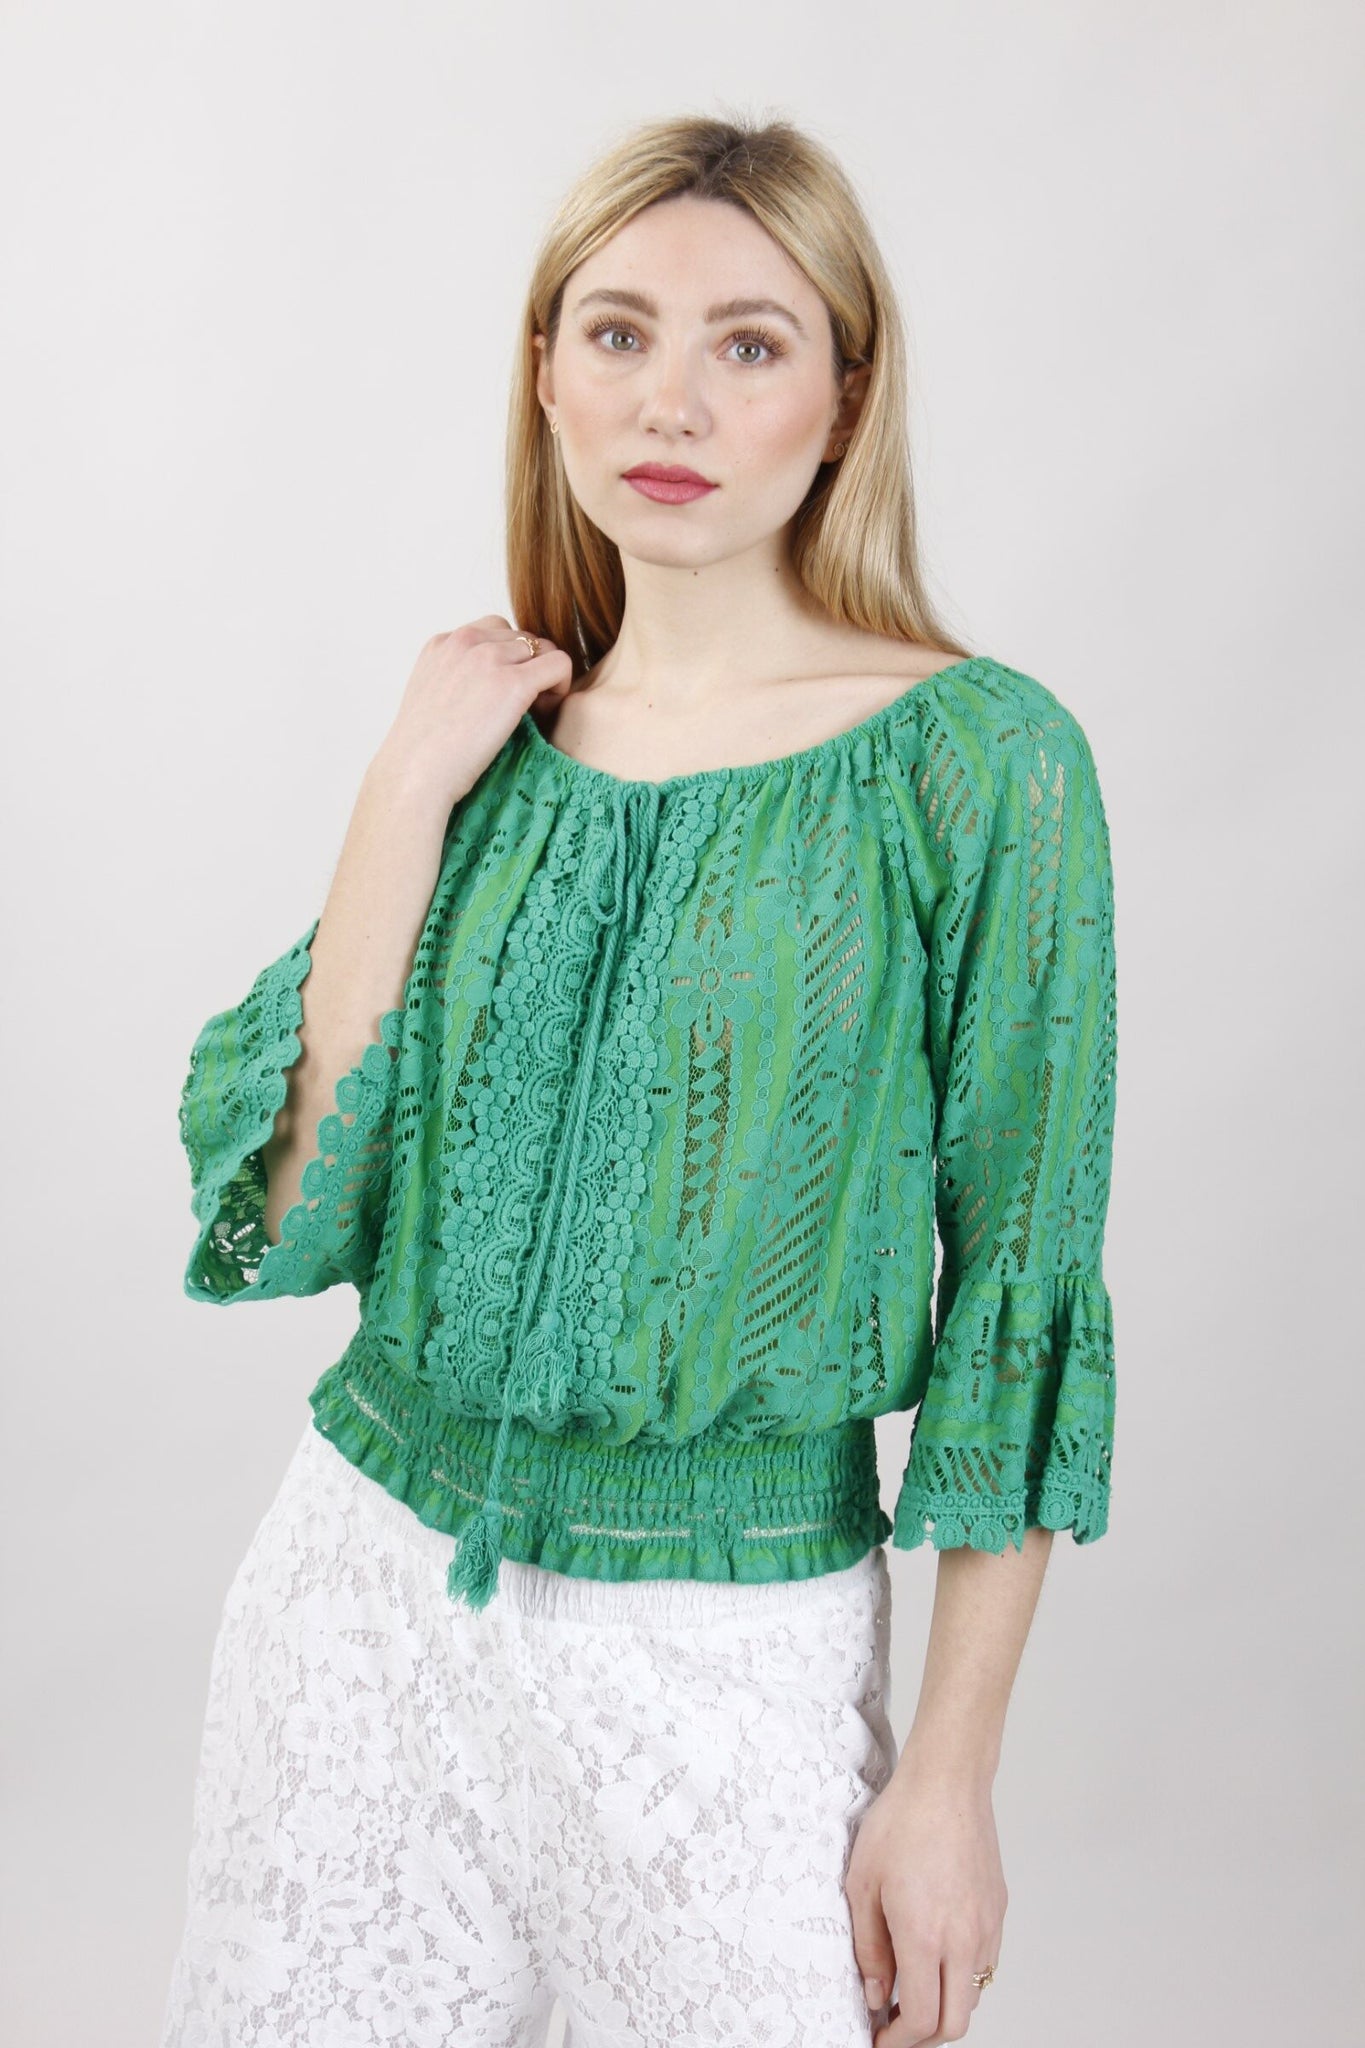 Lovely cotton lace top in many colors